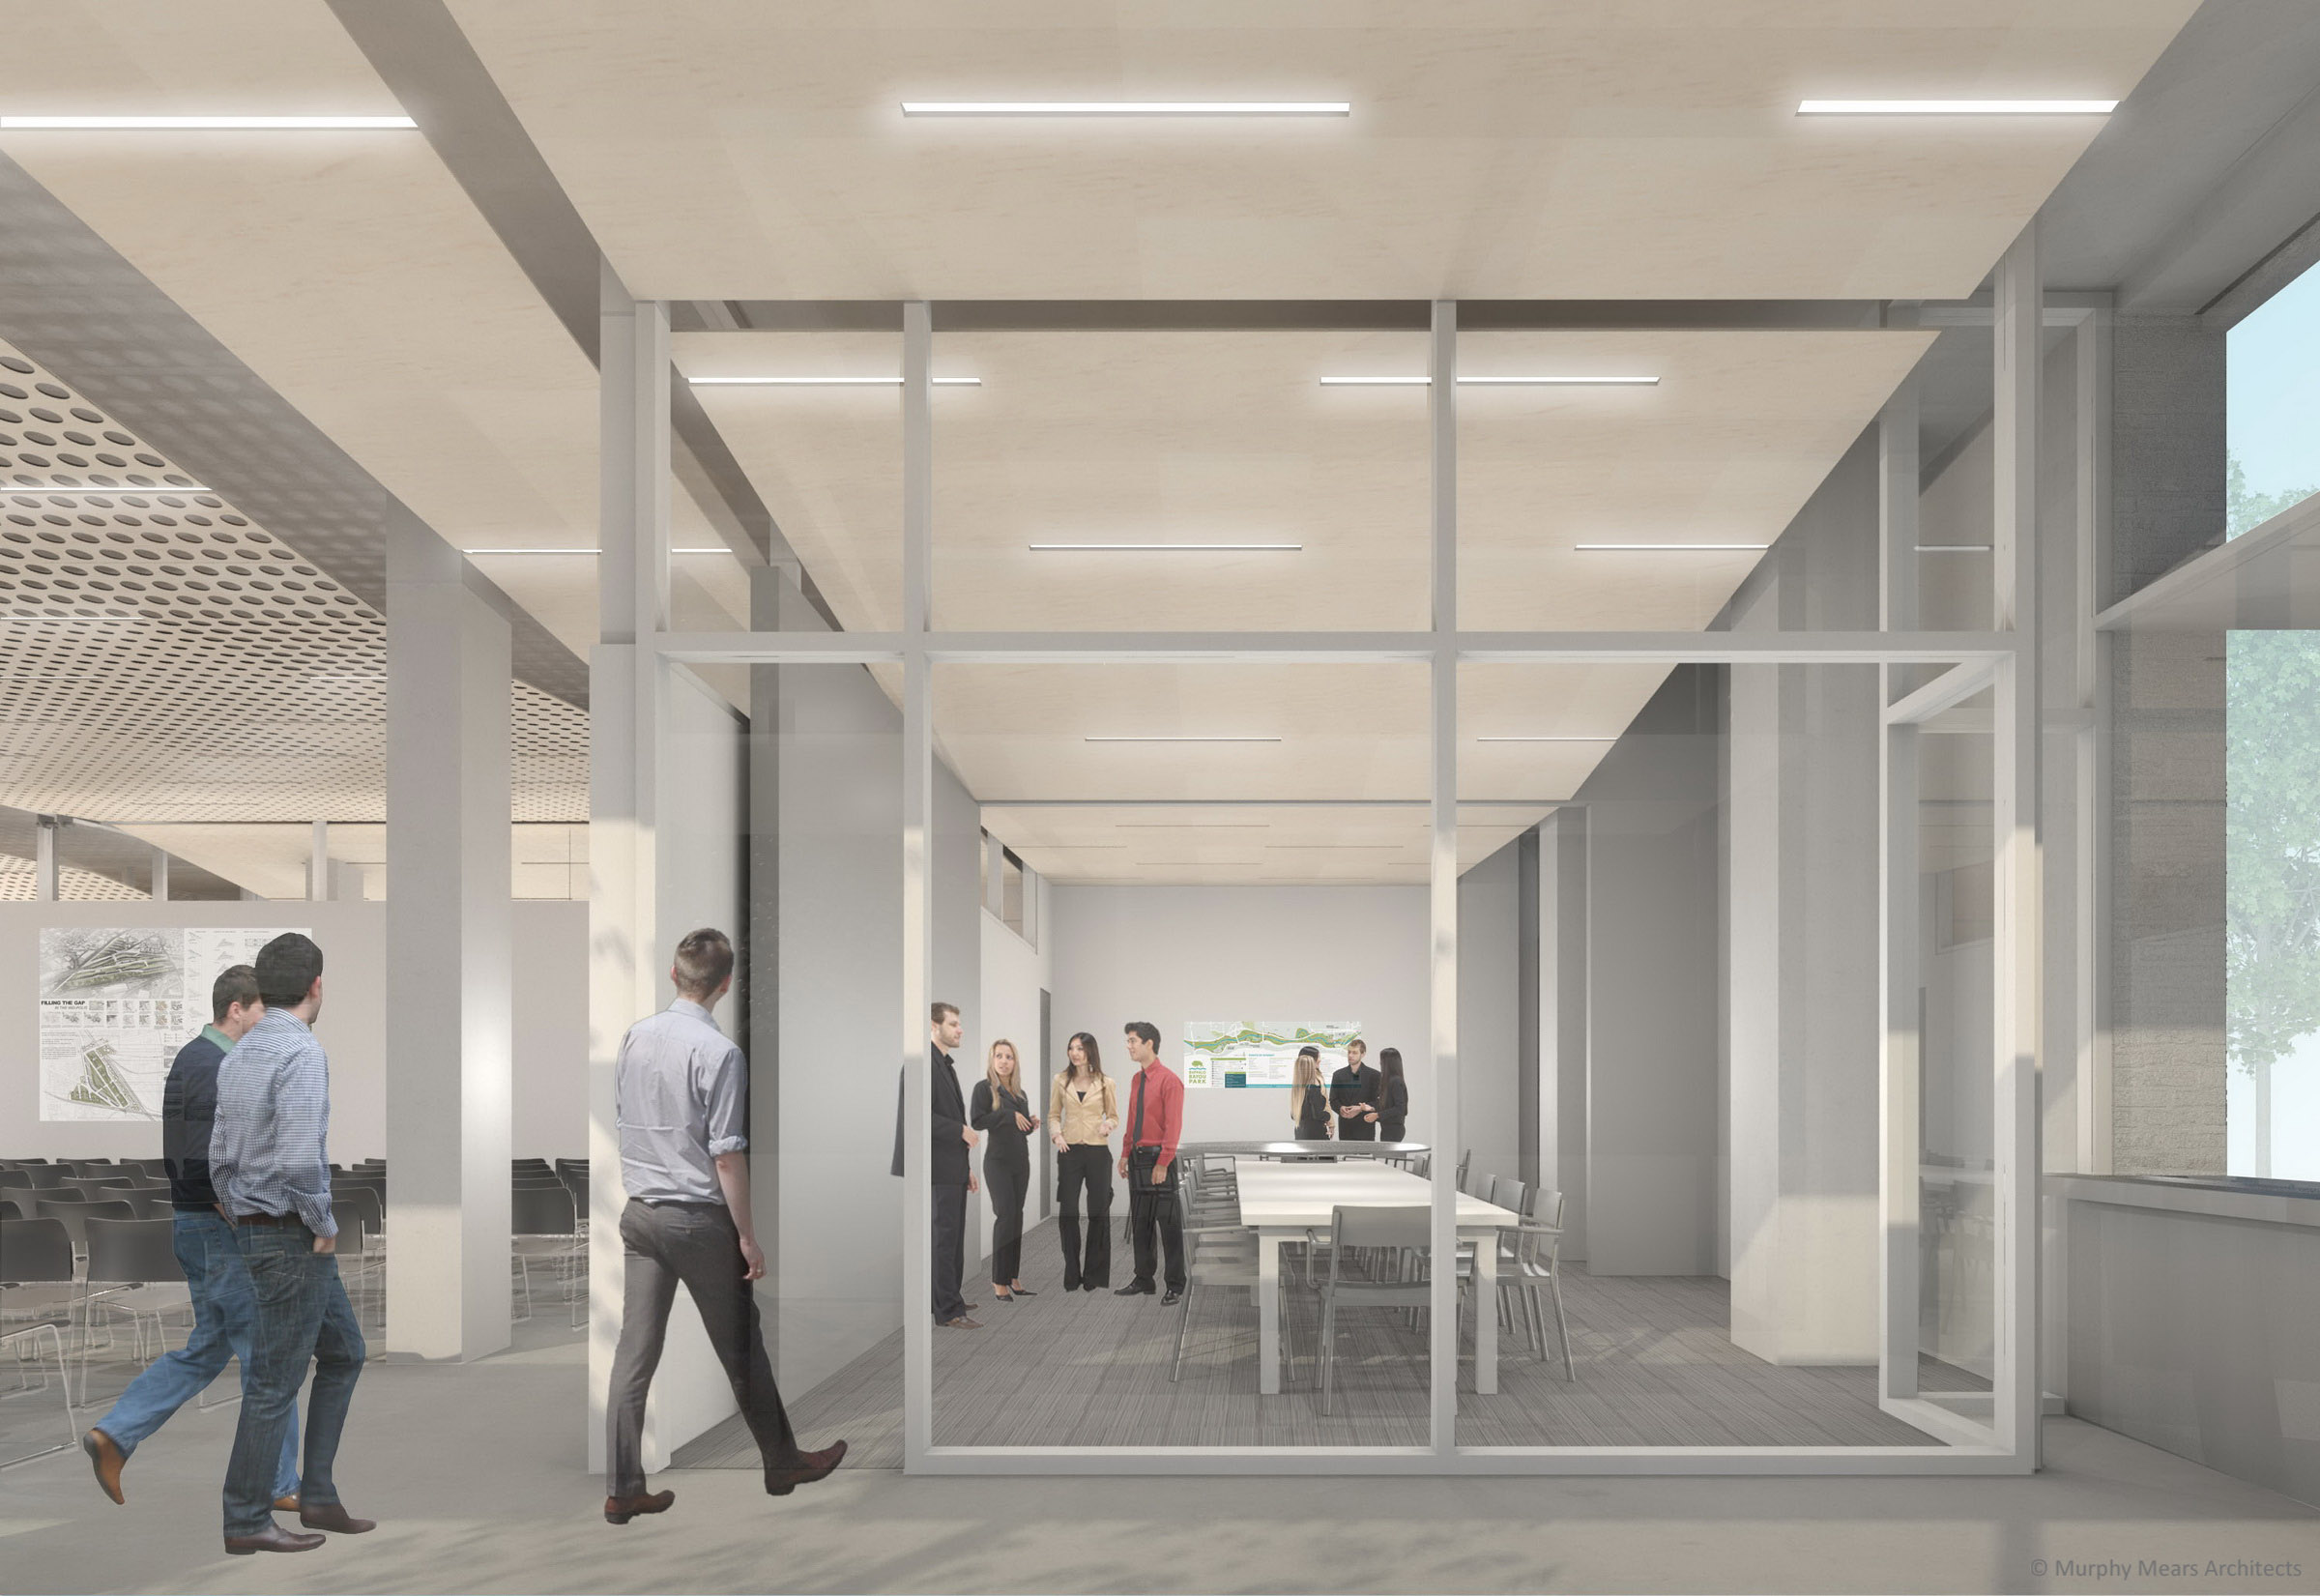 Architecture Center Houston - Competition Rendering - Operable partition open to form one large conference room.